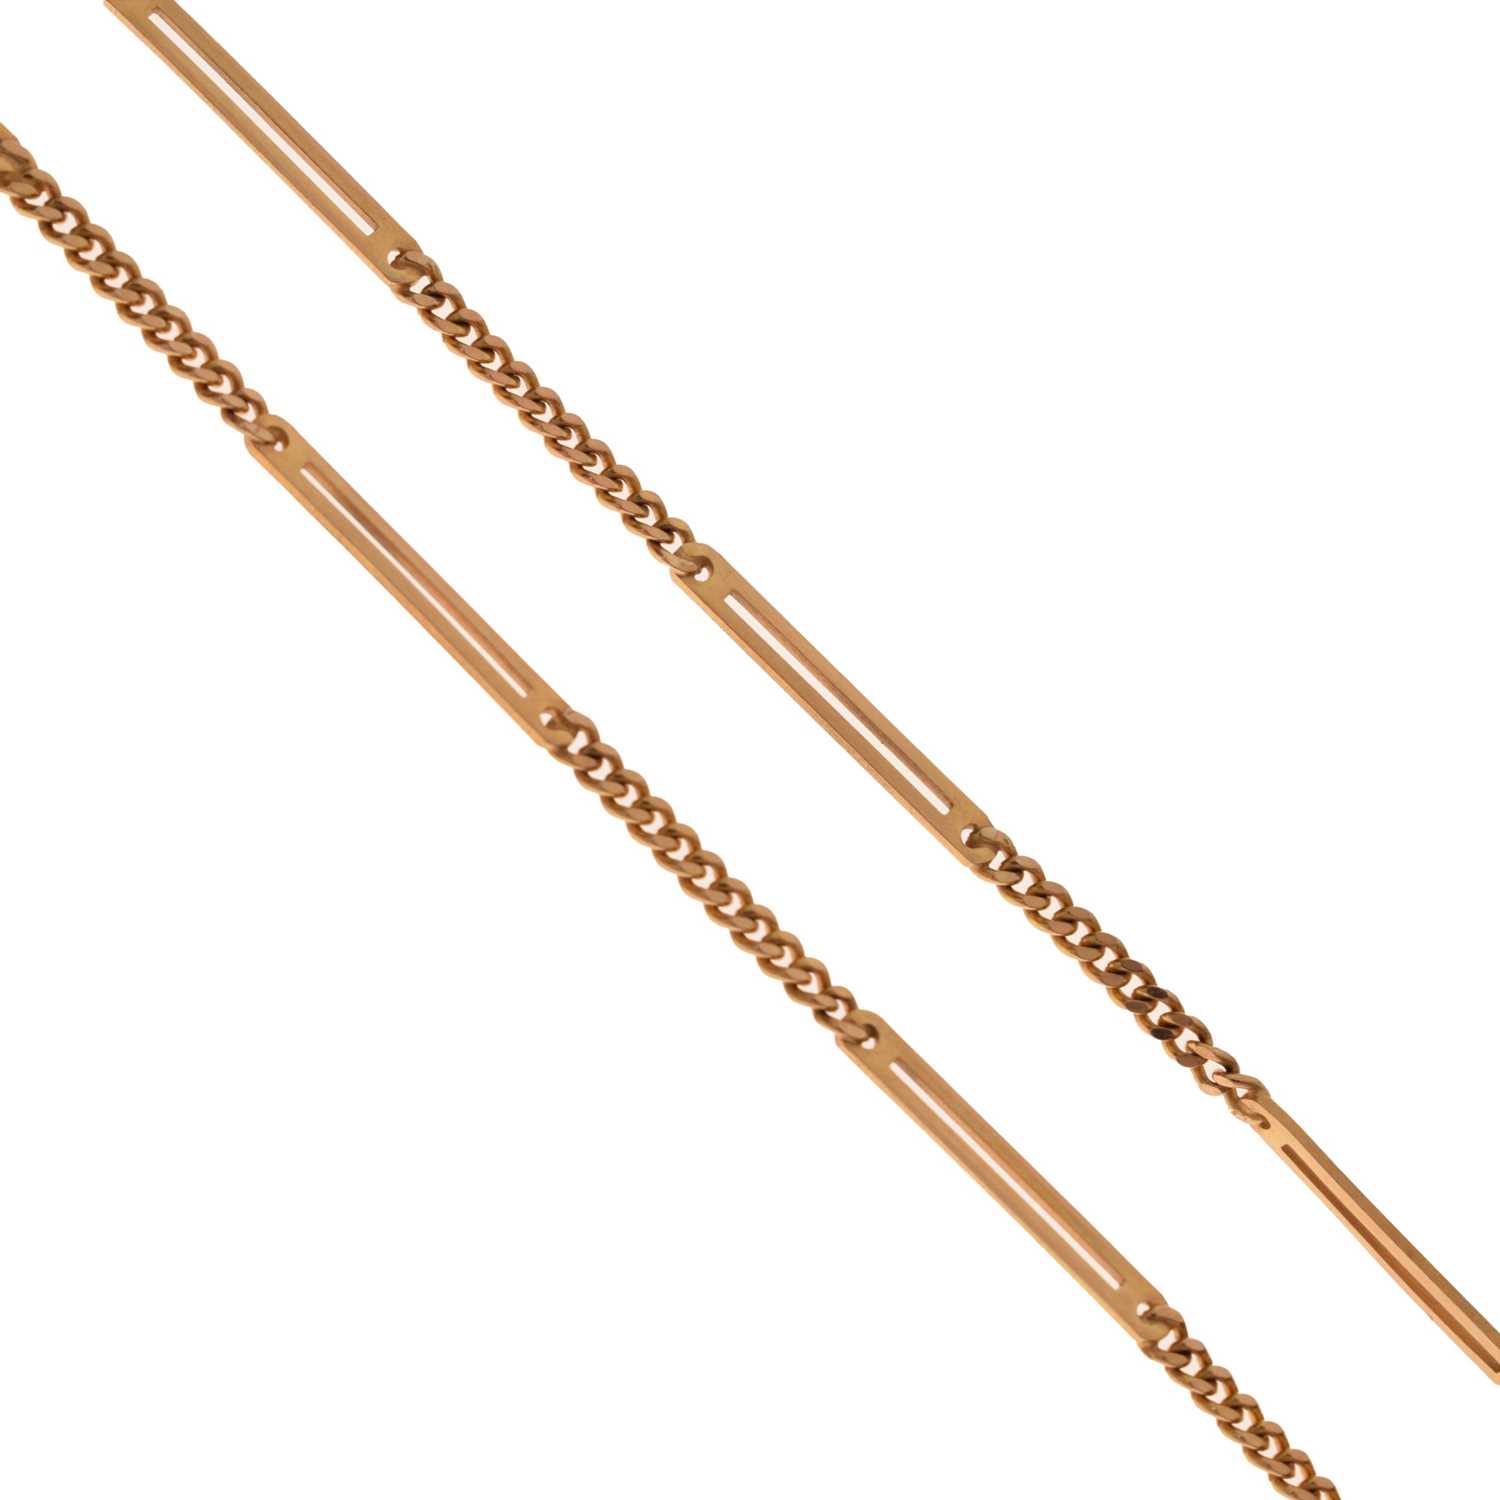 9ct gold trombone link necklace